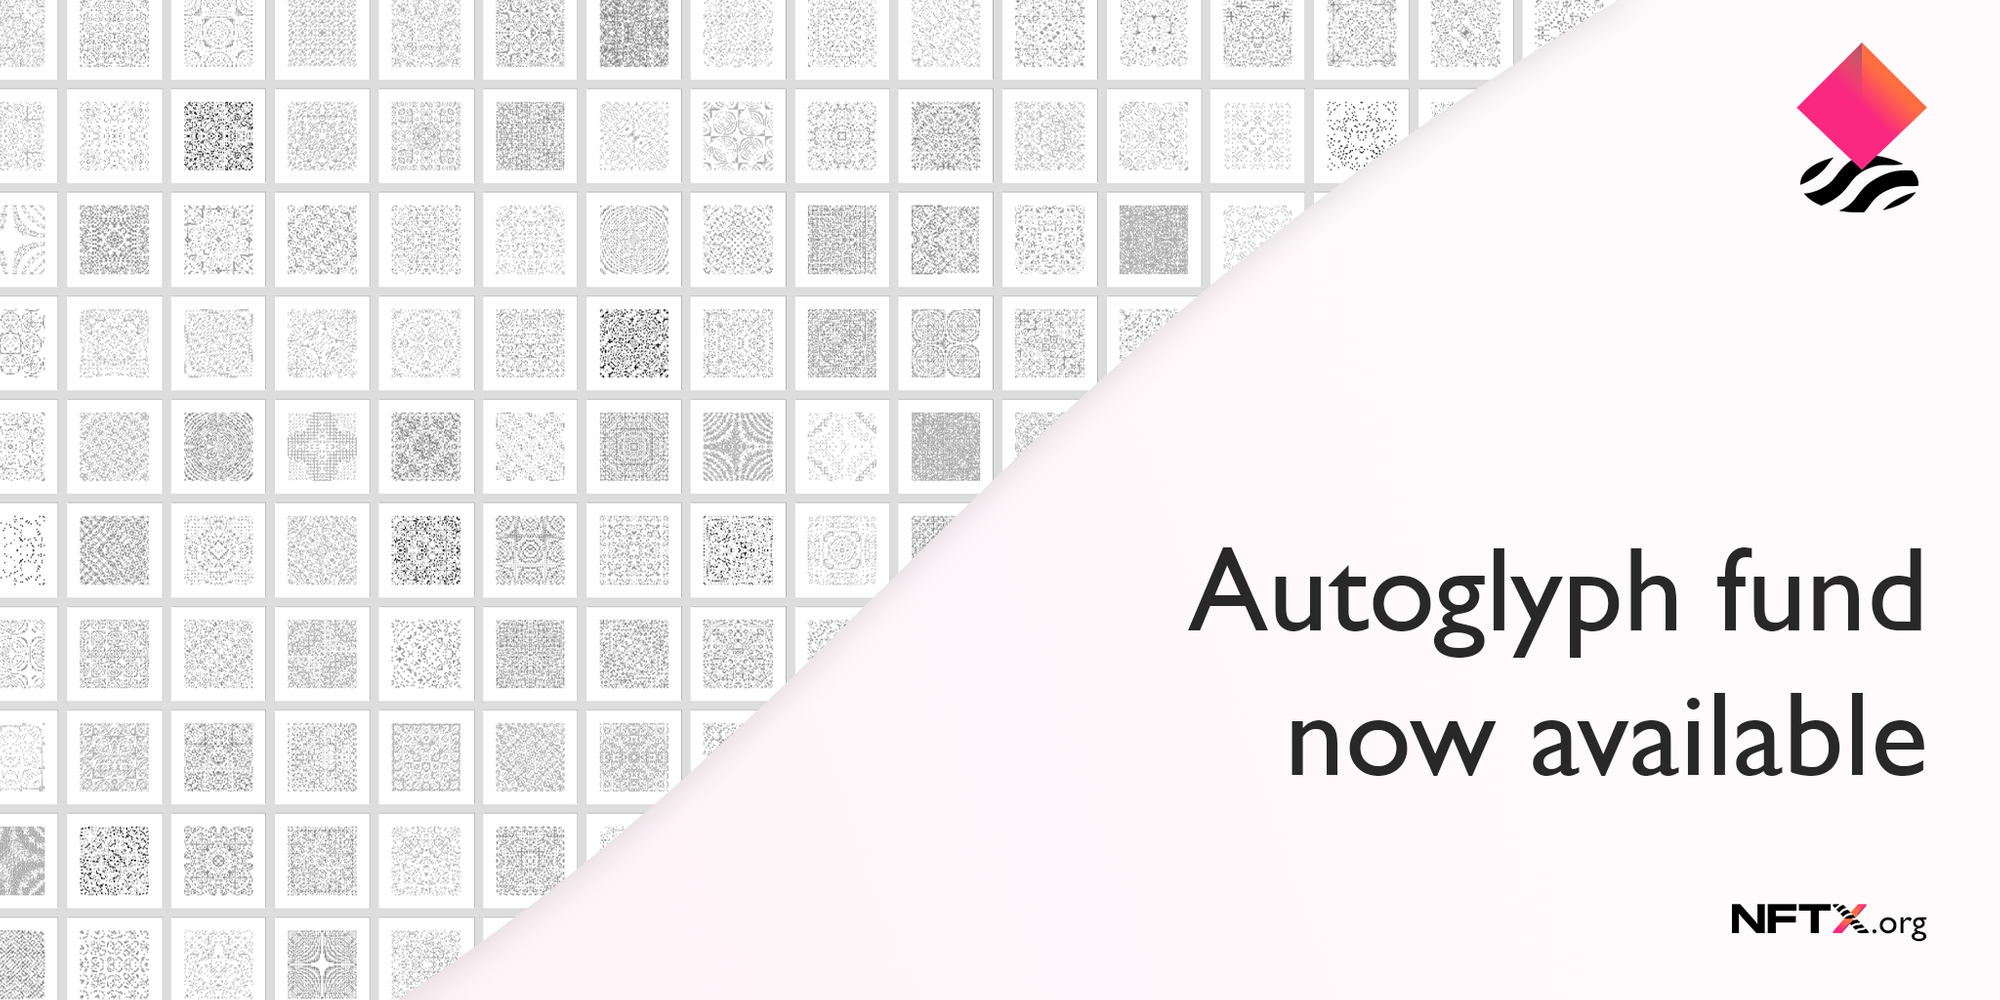 Autoglyph fund available on NFTX